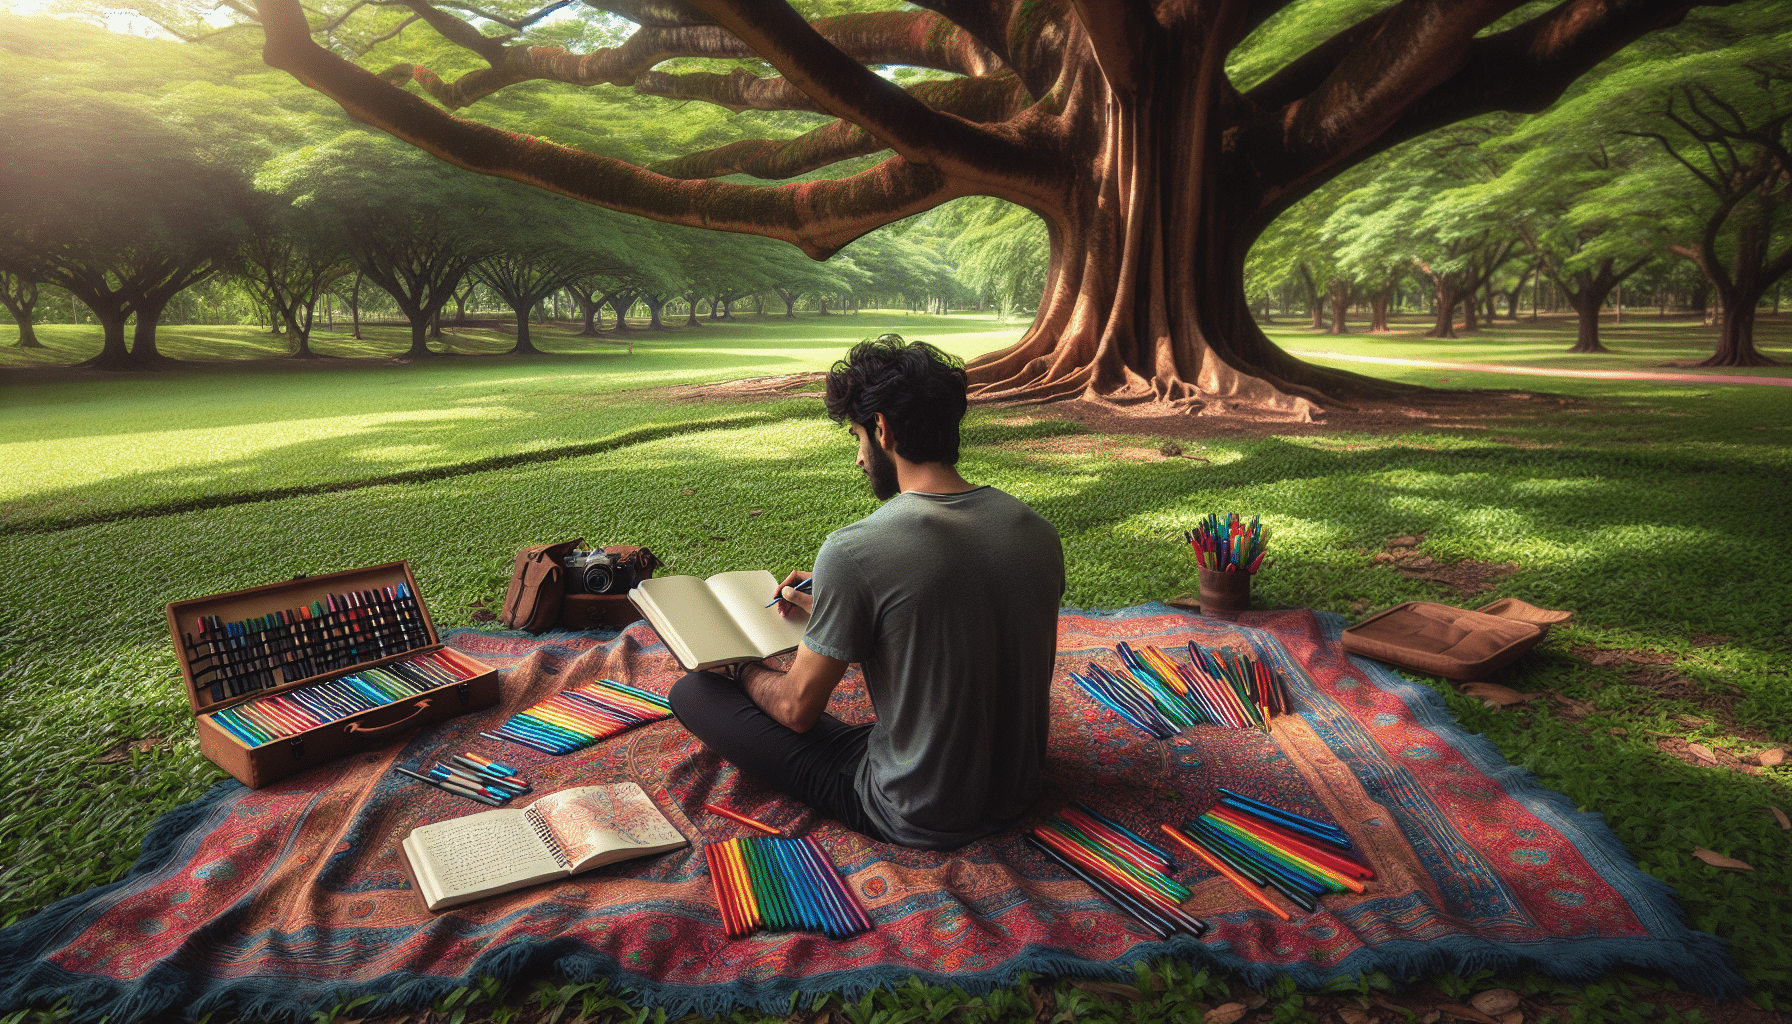 Young individual journaling in a serene park setting.